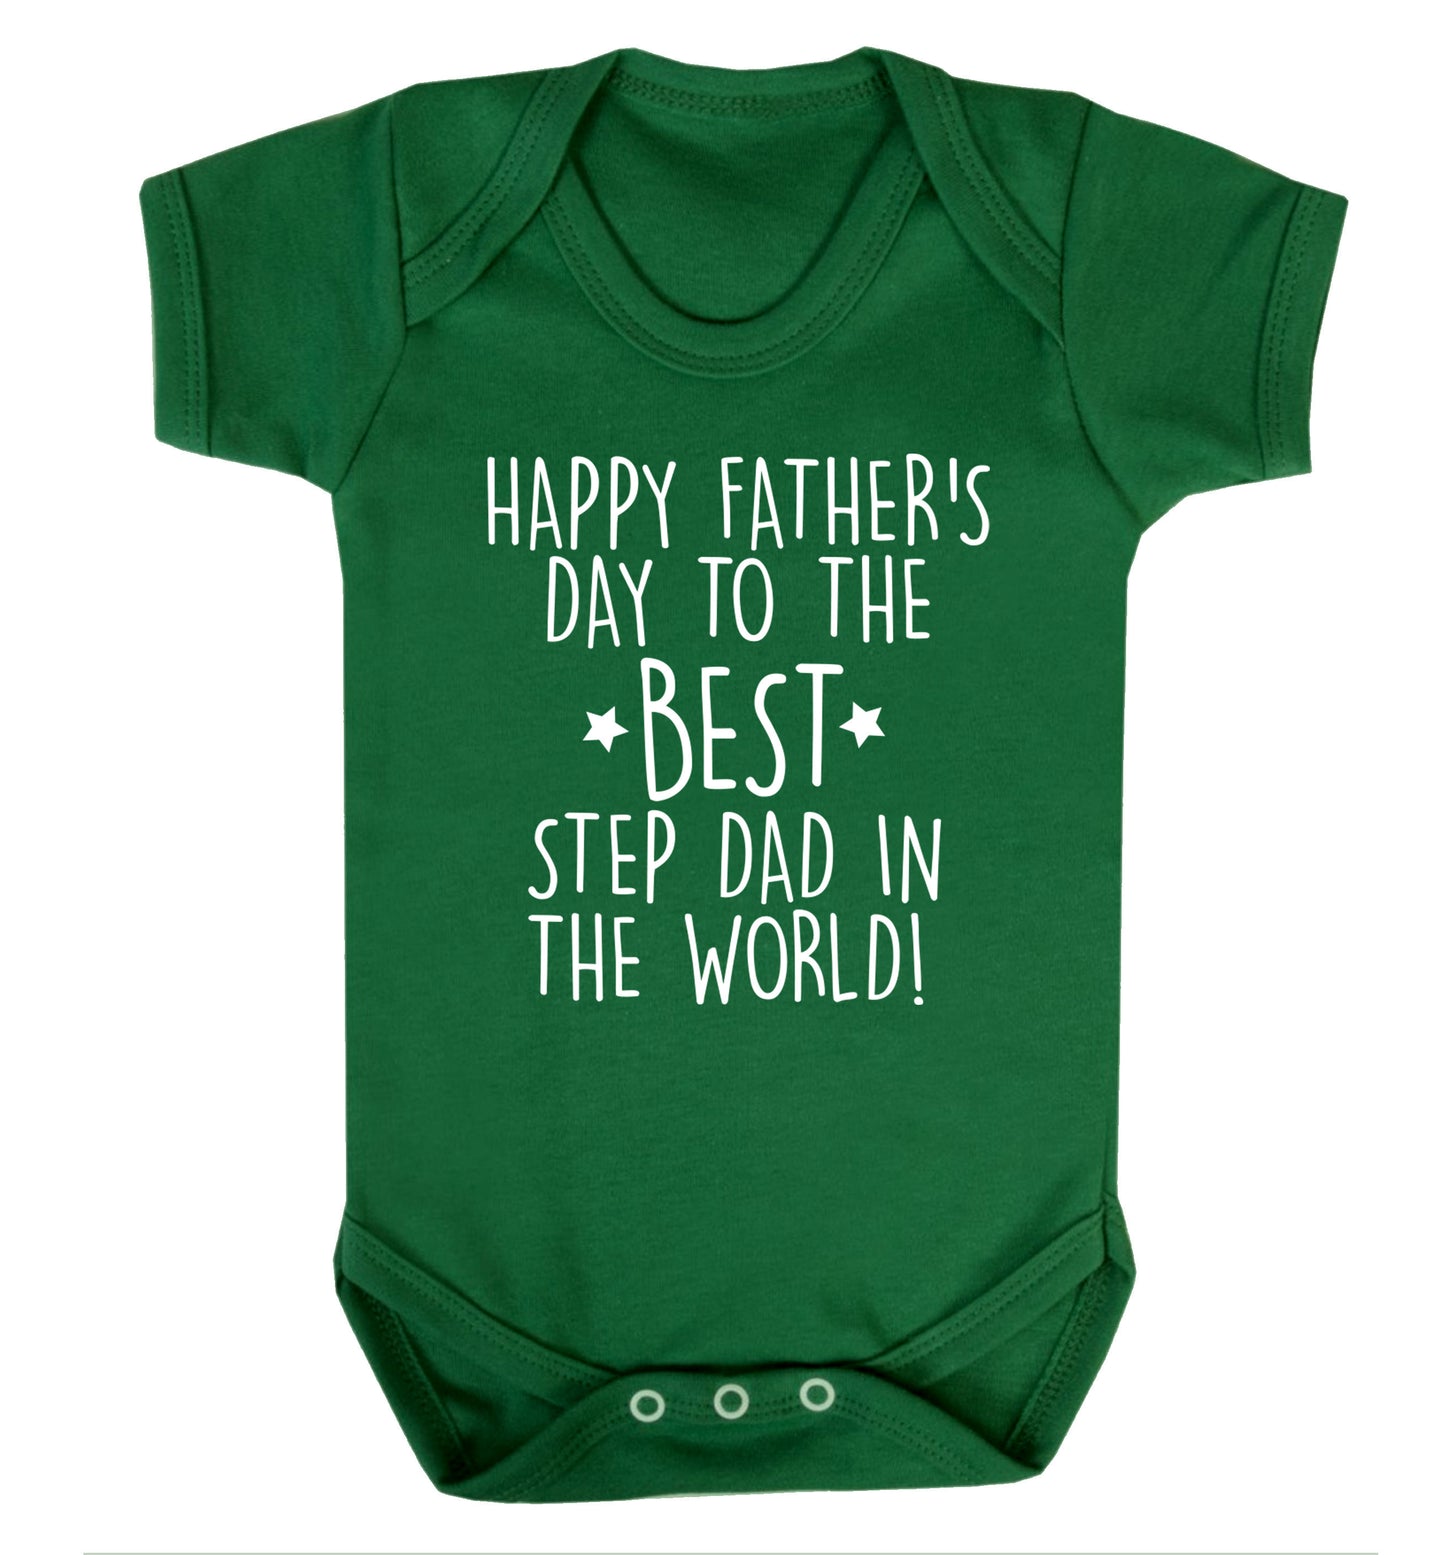 Happy Father's day to the best step dad in the world! Baby Vest green 18-24 months